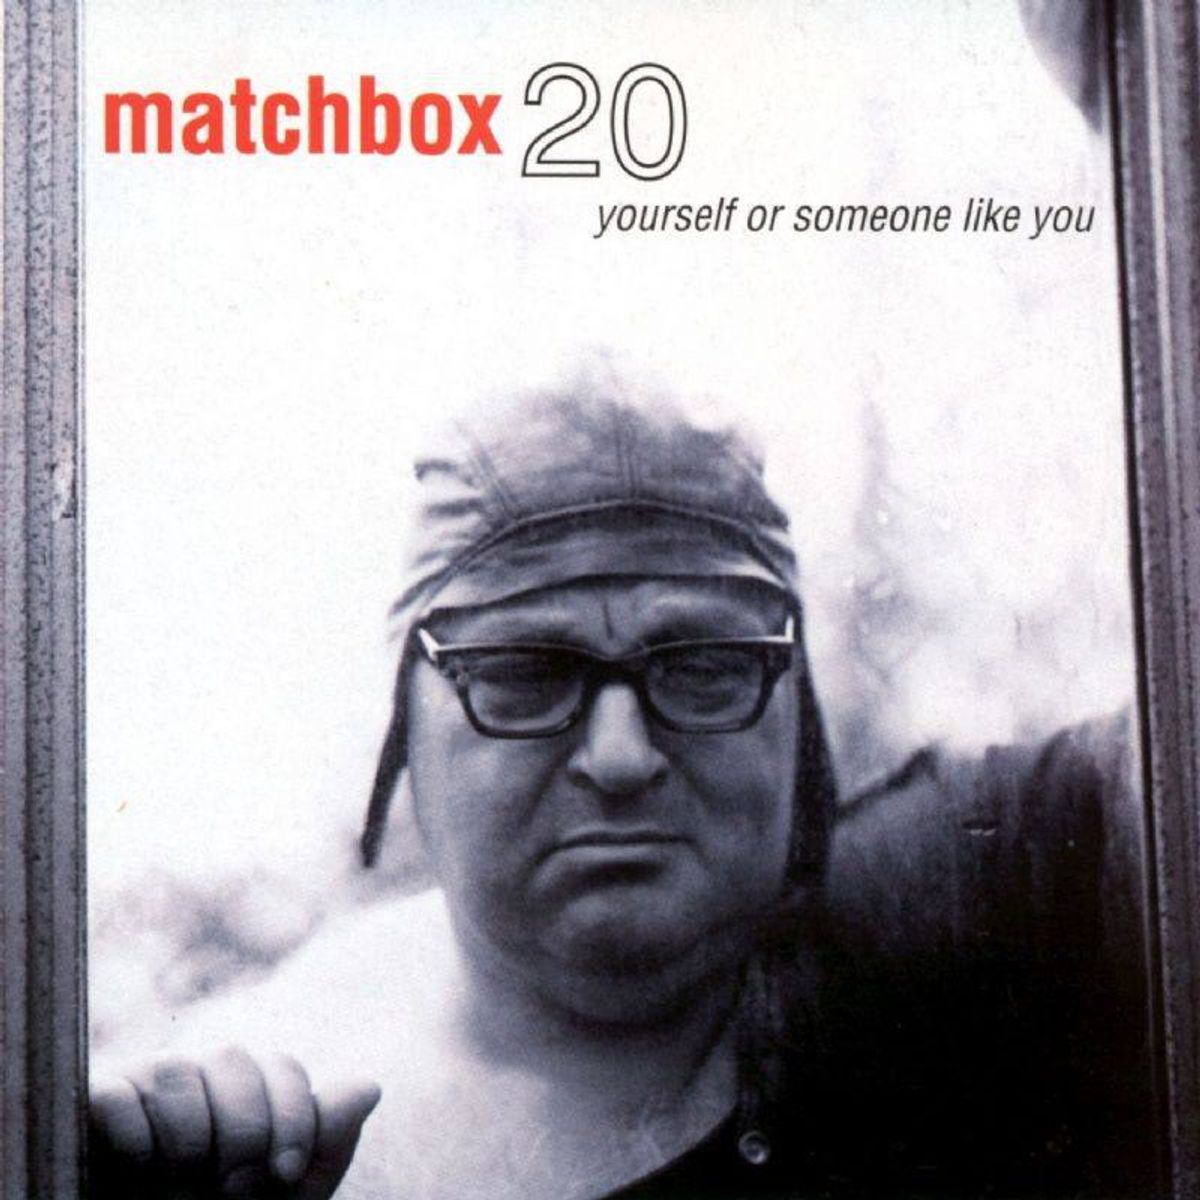 11 Of My Favorite Matchbox 20 Songs